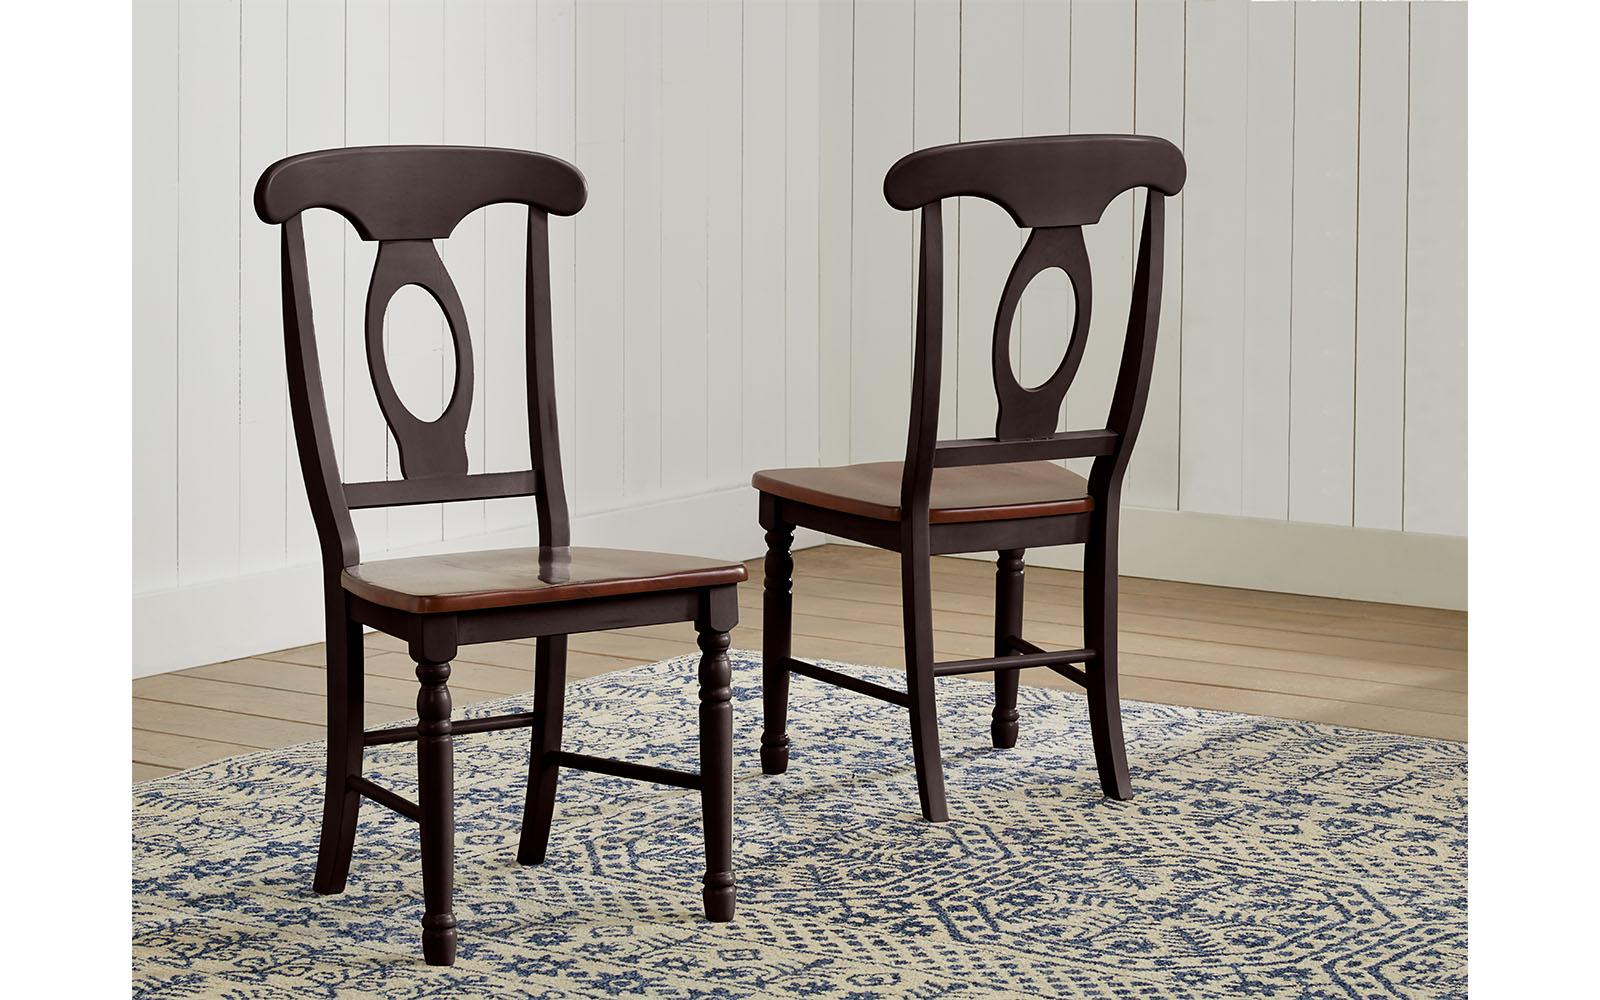 A America British Isles OB Dining Side Chair